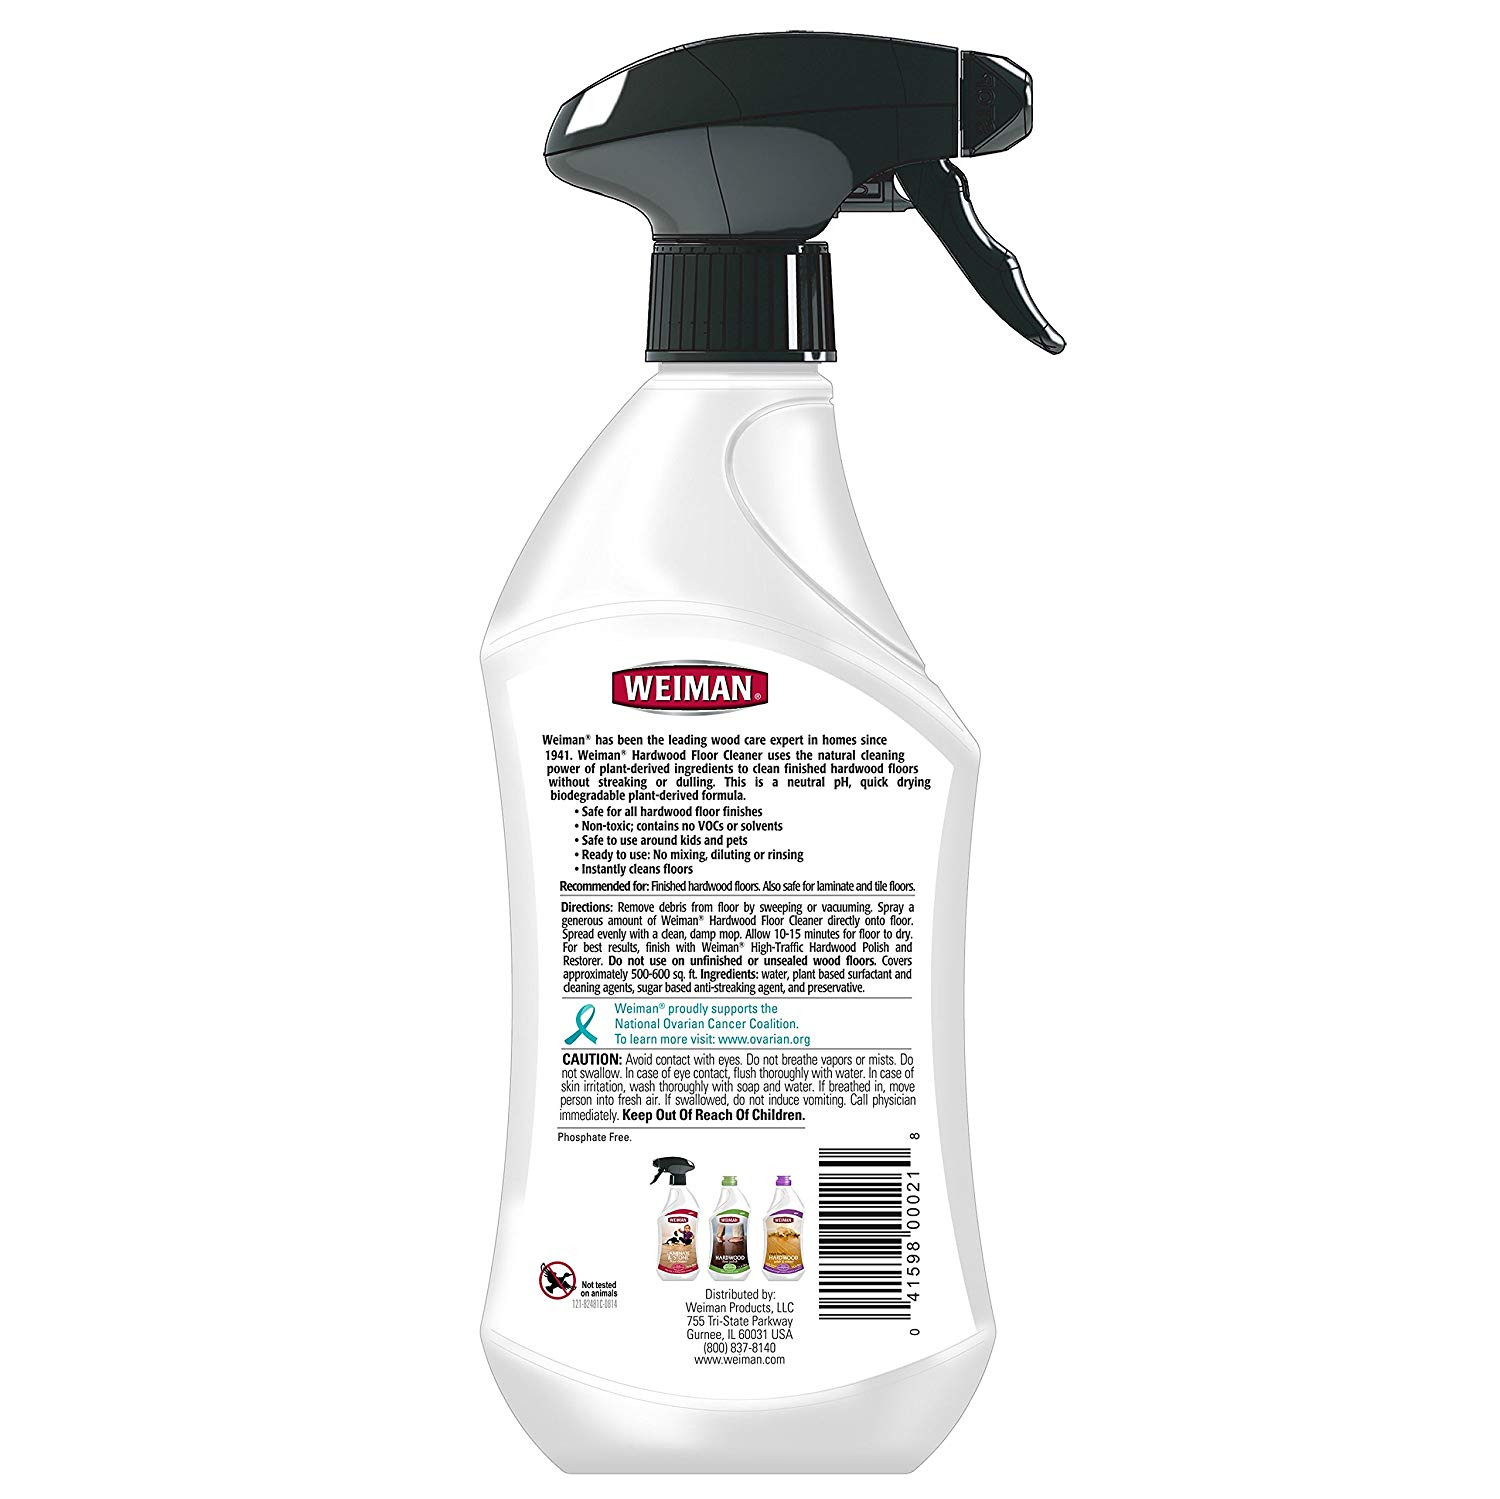 Hardwood Floor Cleaner Disinfectant Of Amazon Com Weiman Hardwood Floor Cleaner Surface Safe No Harsh Regarding Amazon Com Weiman Hardwood Floor Cleaner Surface Safe No Harsh Scent Safe for Use Around Kids and Pets Residue Free 27 Oz Trigger Home Kitchen